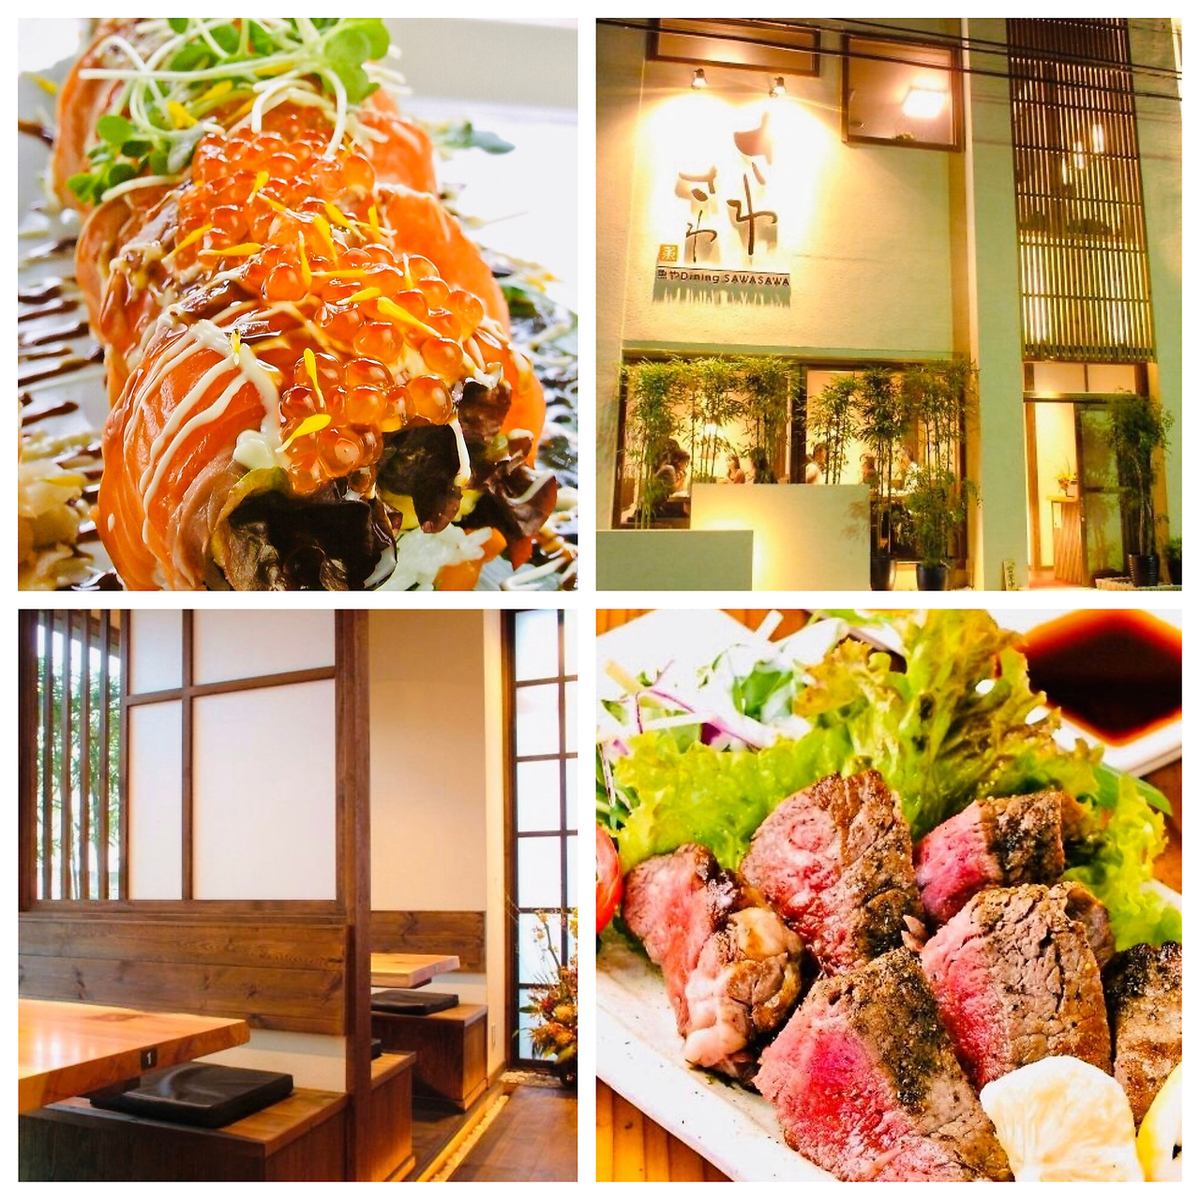 Only a 3-minute walk from Himeji Station South Exit! Excellent access, convenient for banquets and meals!